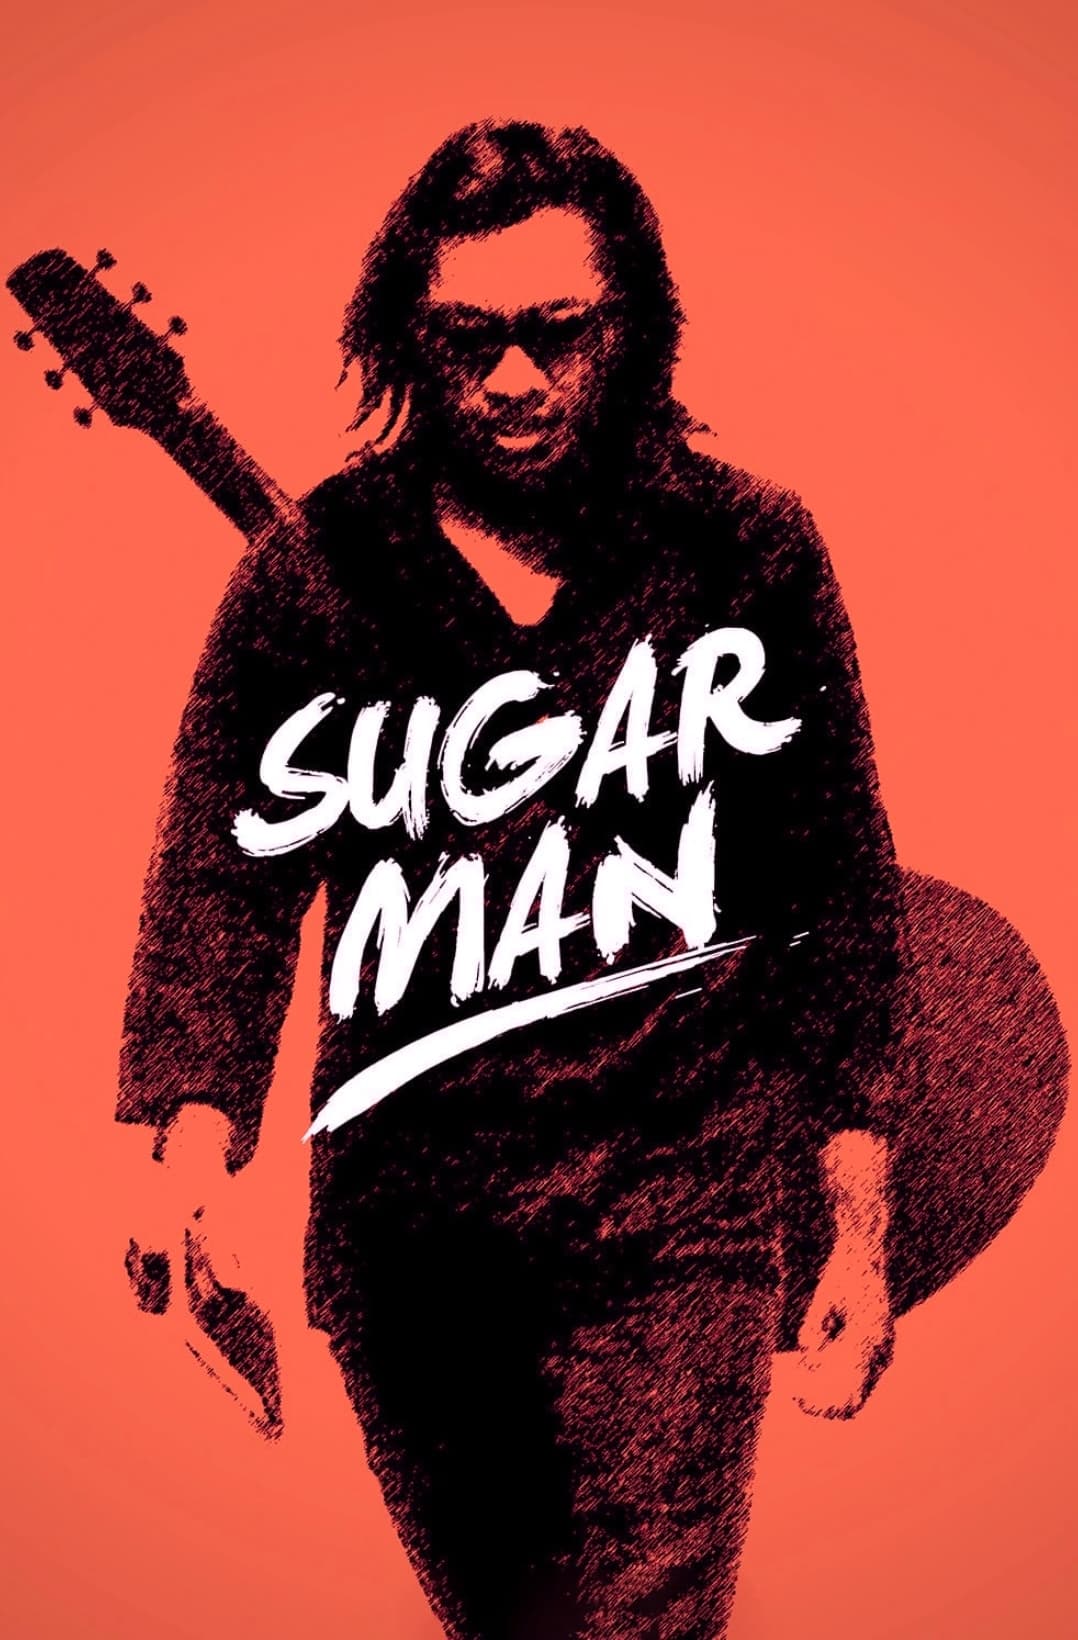 Searching for Sugarman (12A)